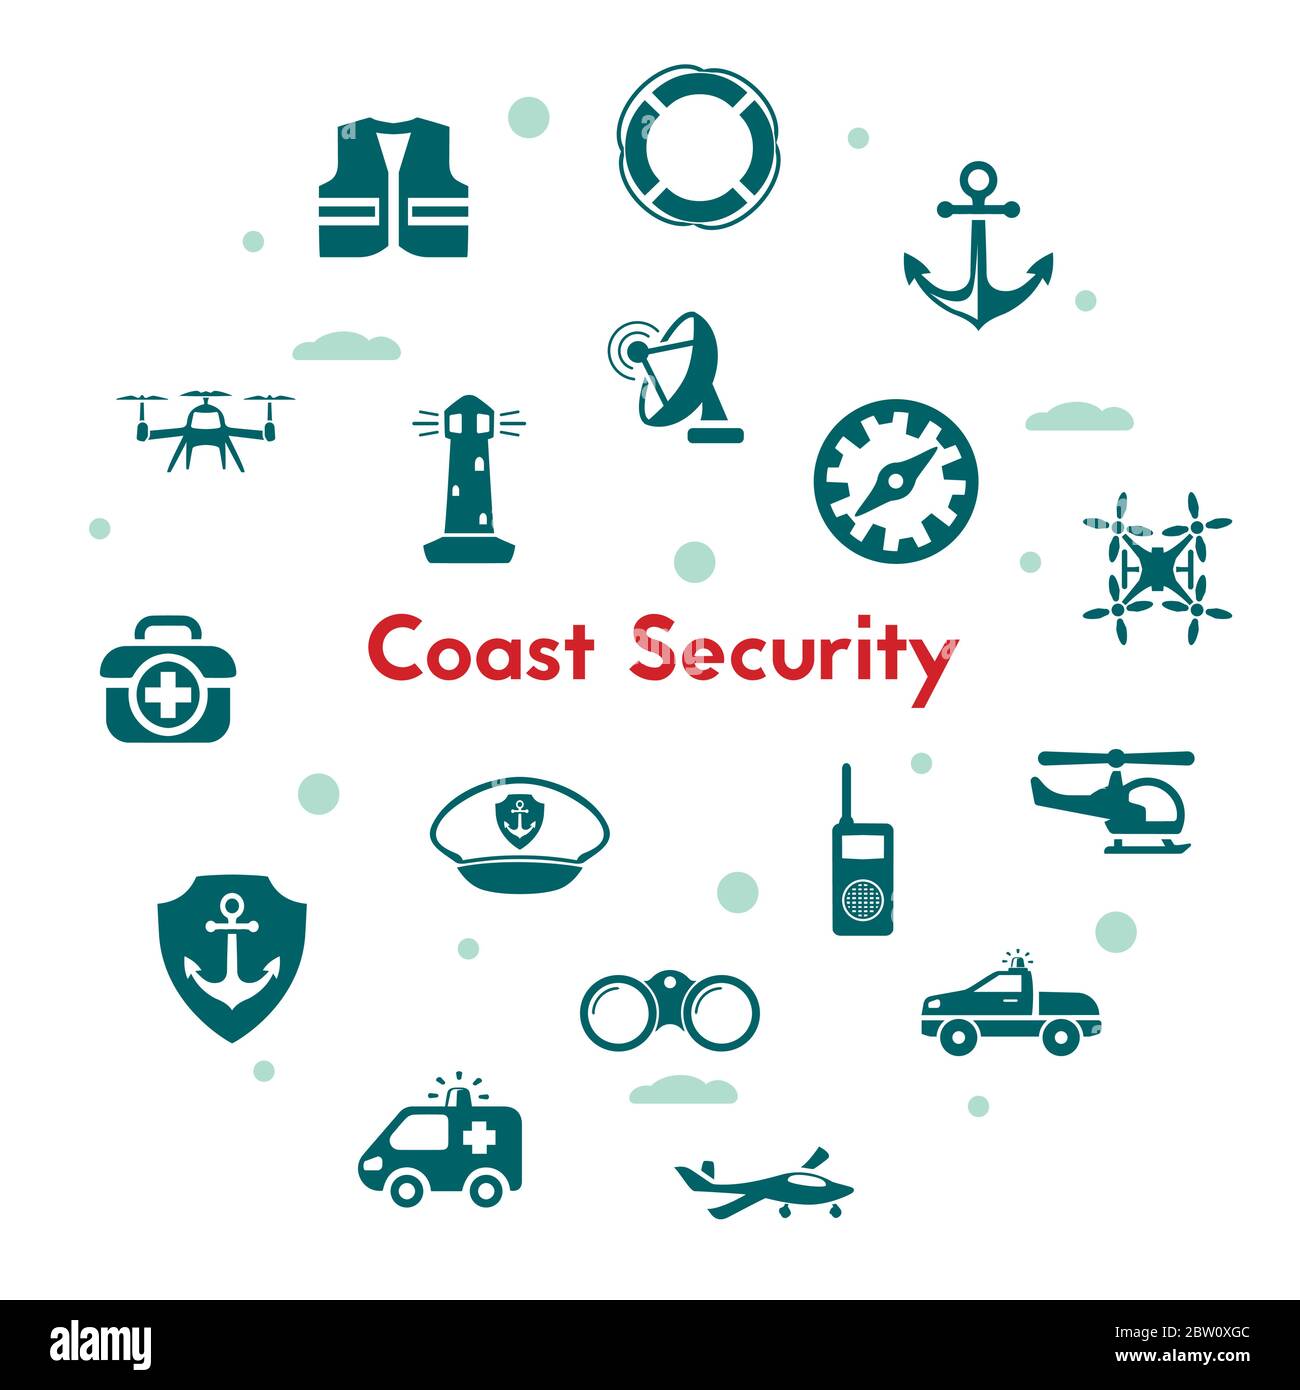 Coast security icons Stock Vector